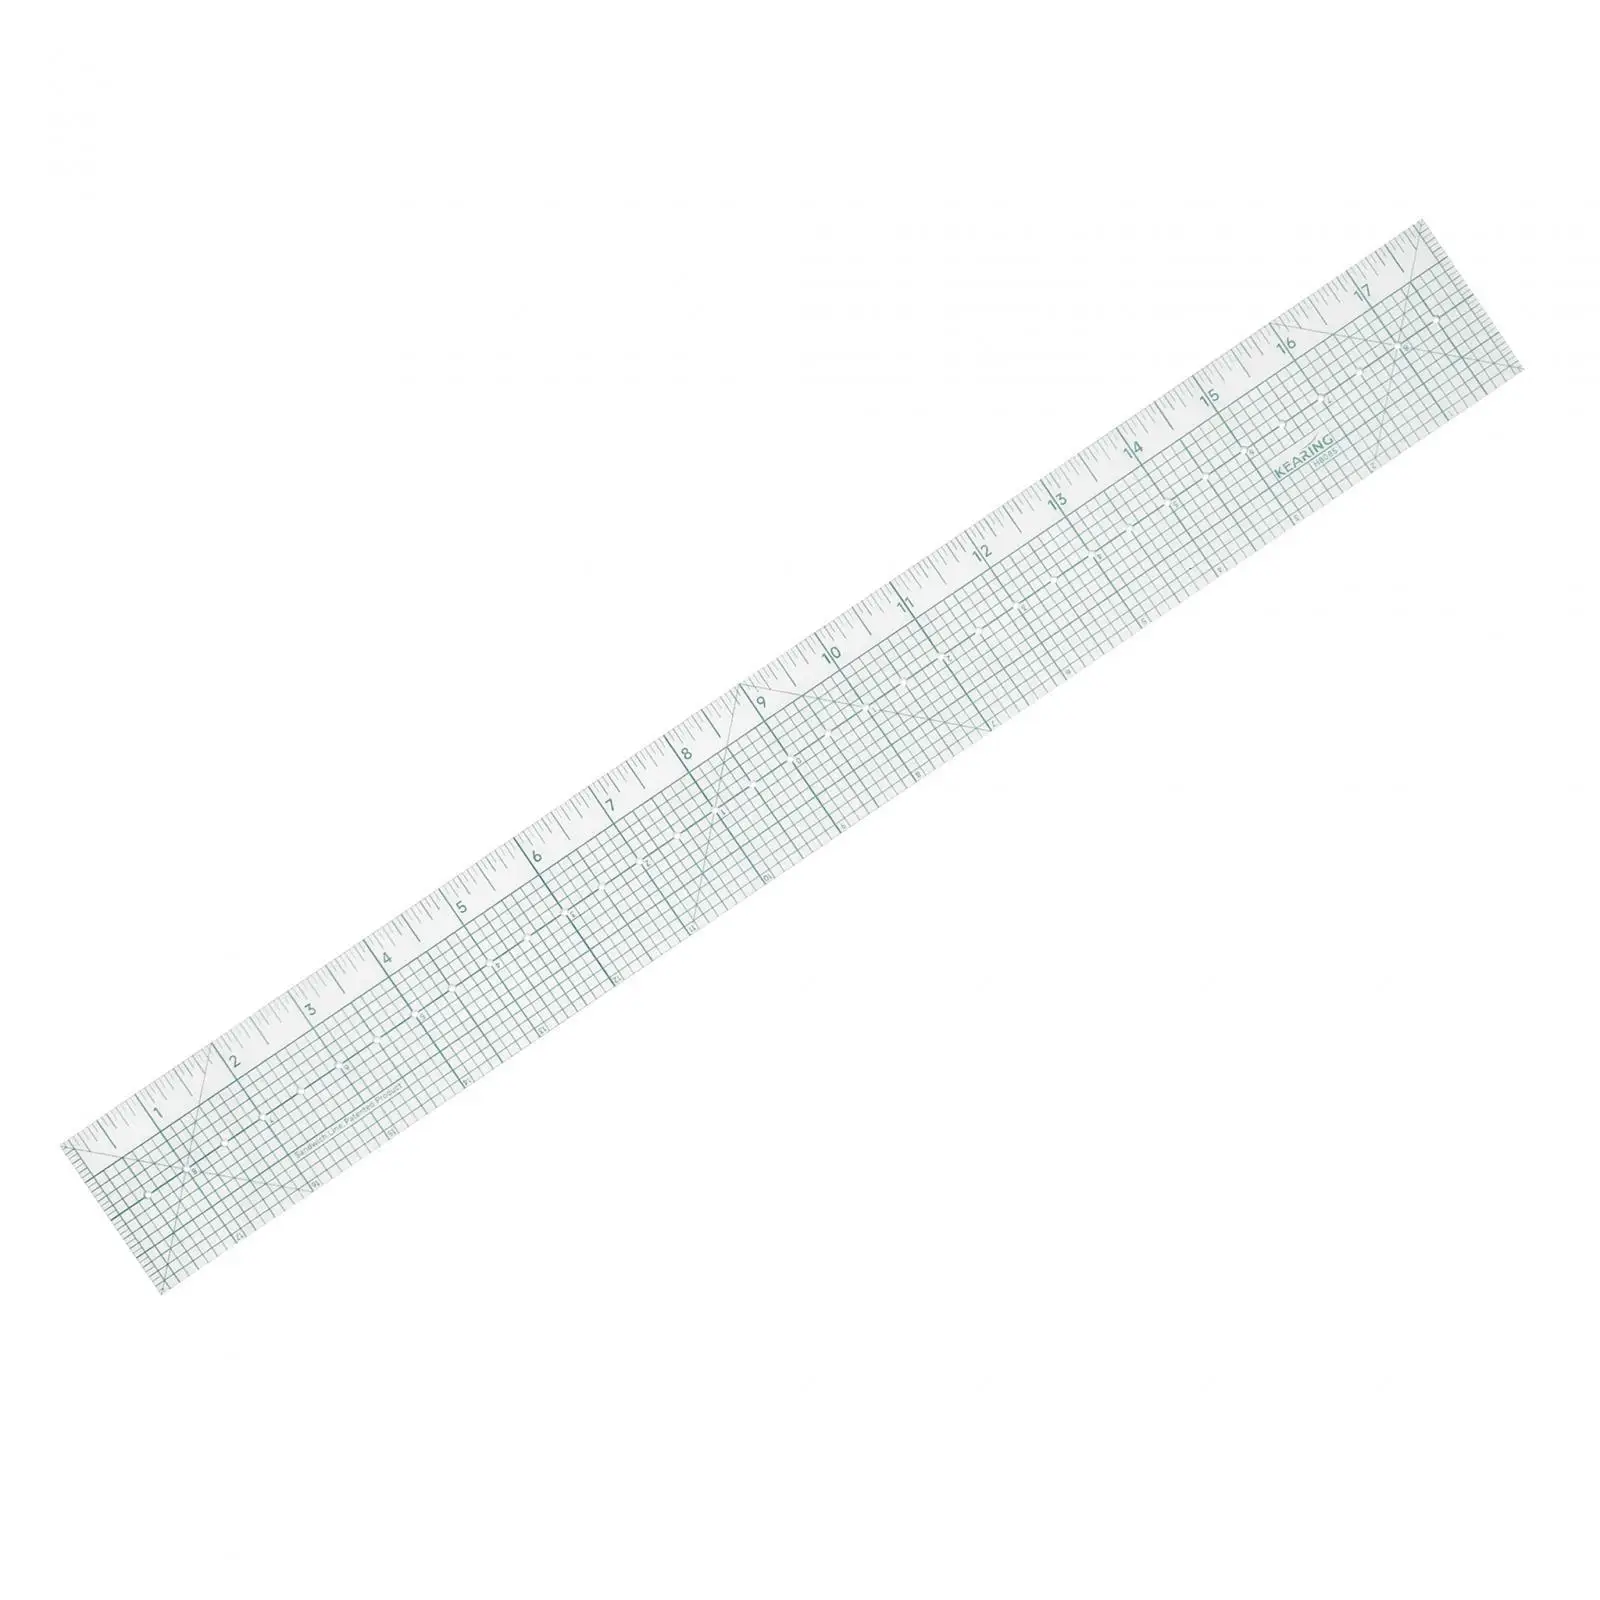 Sewing Ruler 18in Universal Portable Acrylic Ruler Transparent Ruler for Home Clothing Making Measuring Precision Measurements